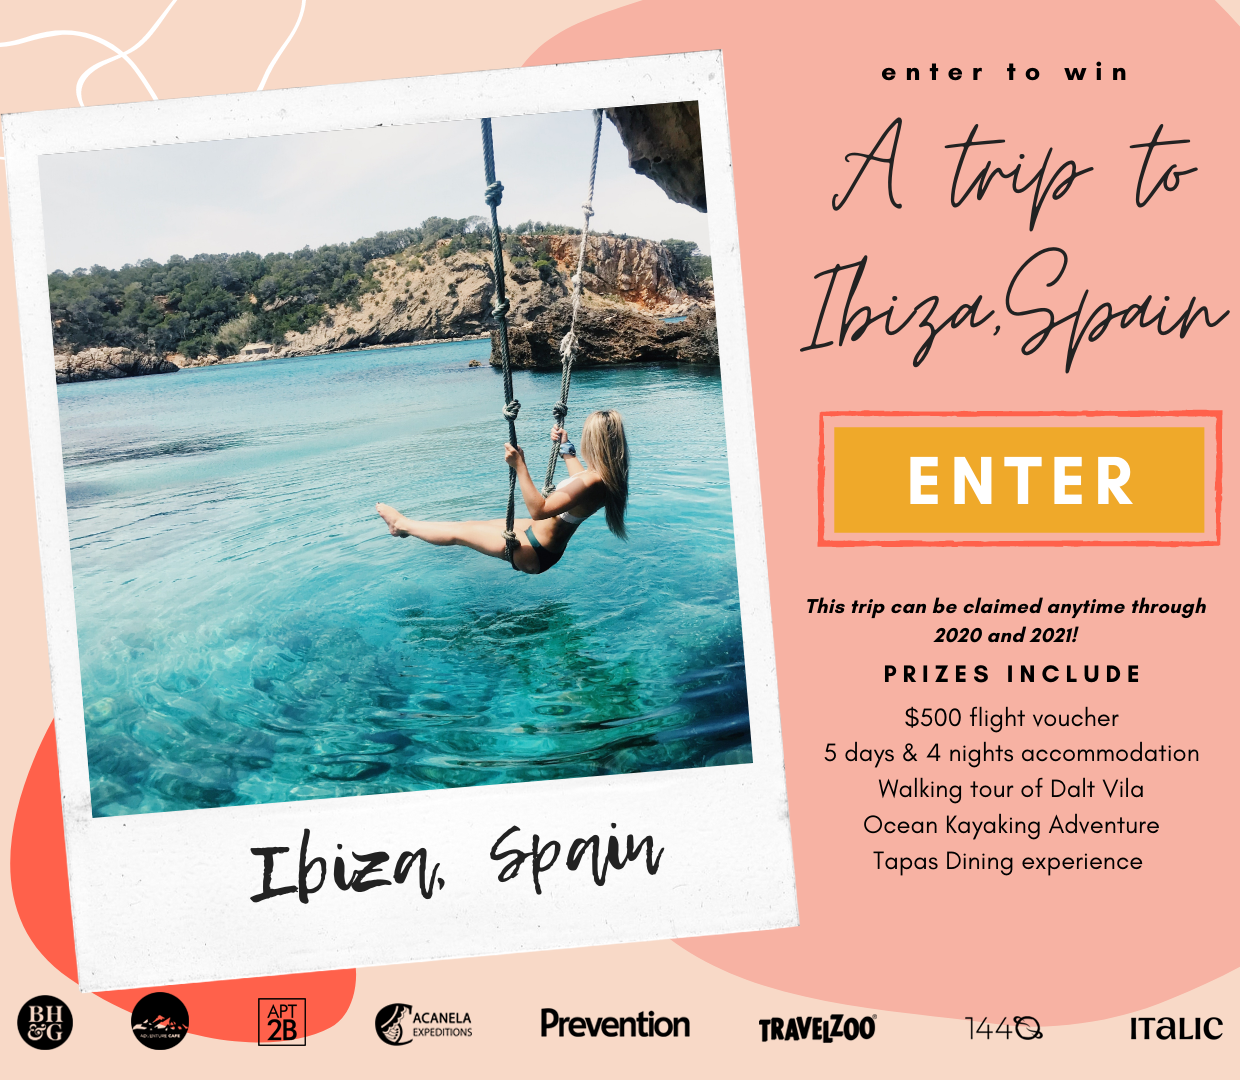 Enter to Win A Trip To Ibiza, Spain! This trip includes: $500 flight voucher, 4-night and 5-day accommodation, a walking tour of Dalt Vila, an ocean kayaking adventure, and a Tapas dining experience. This trip can be claimed anytime through 2020 and 2021!